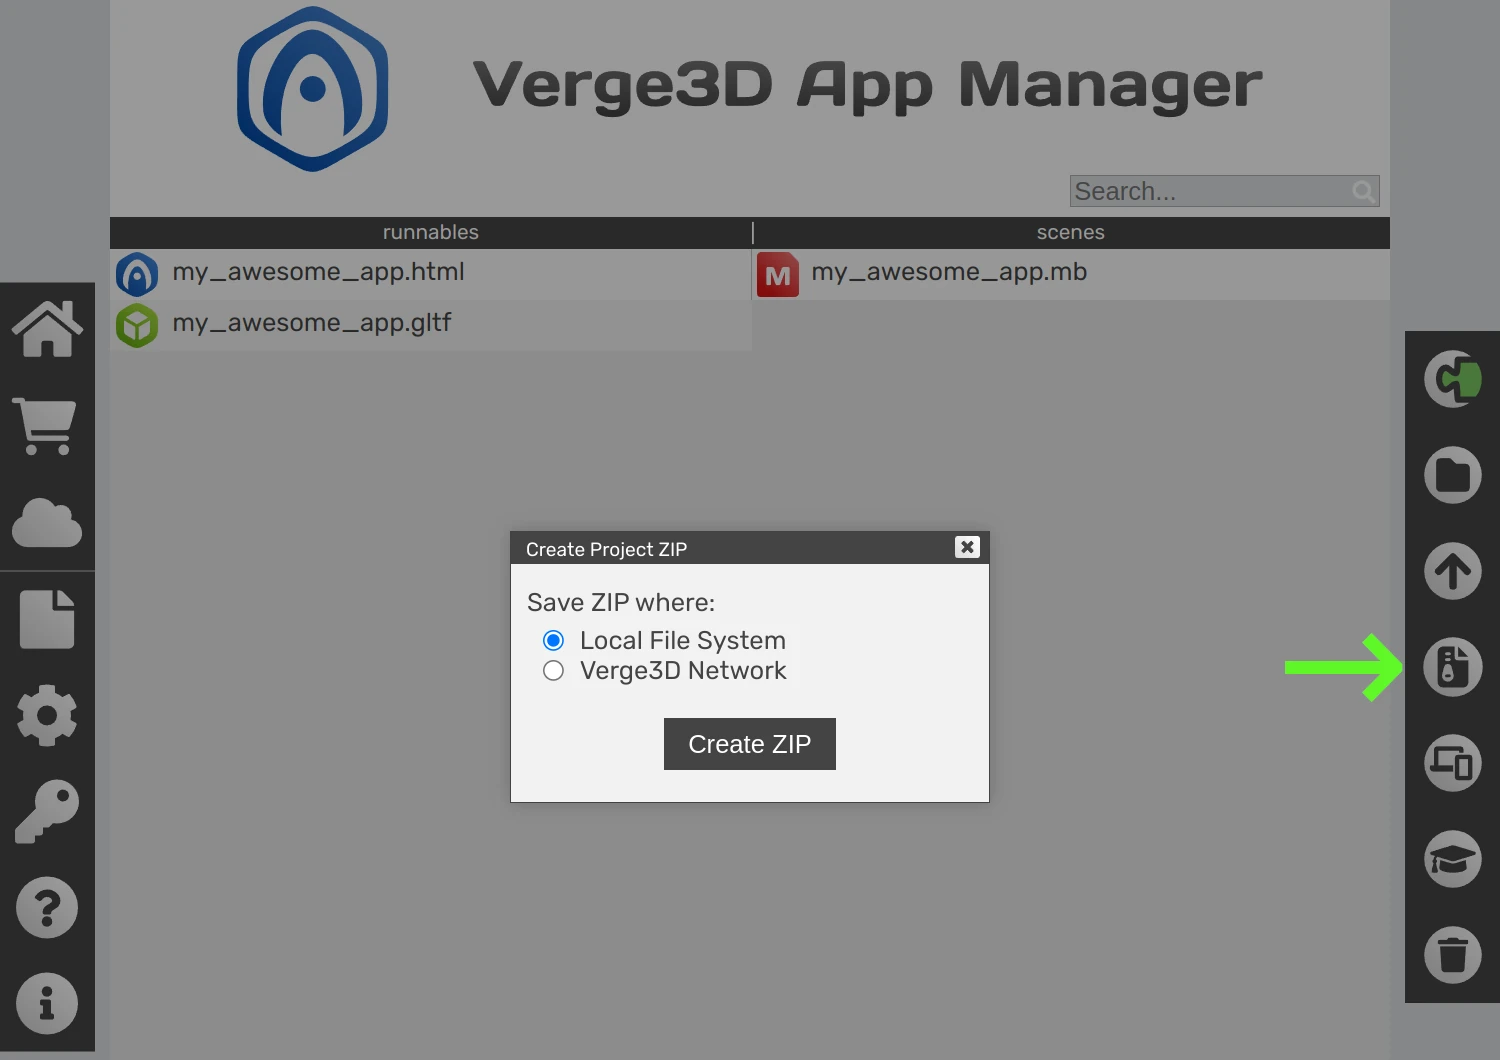 Verge3D-Maya: App Manager - save project zip